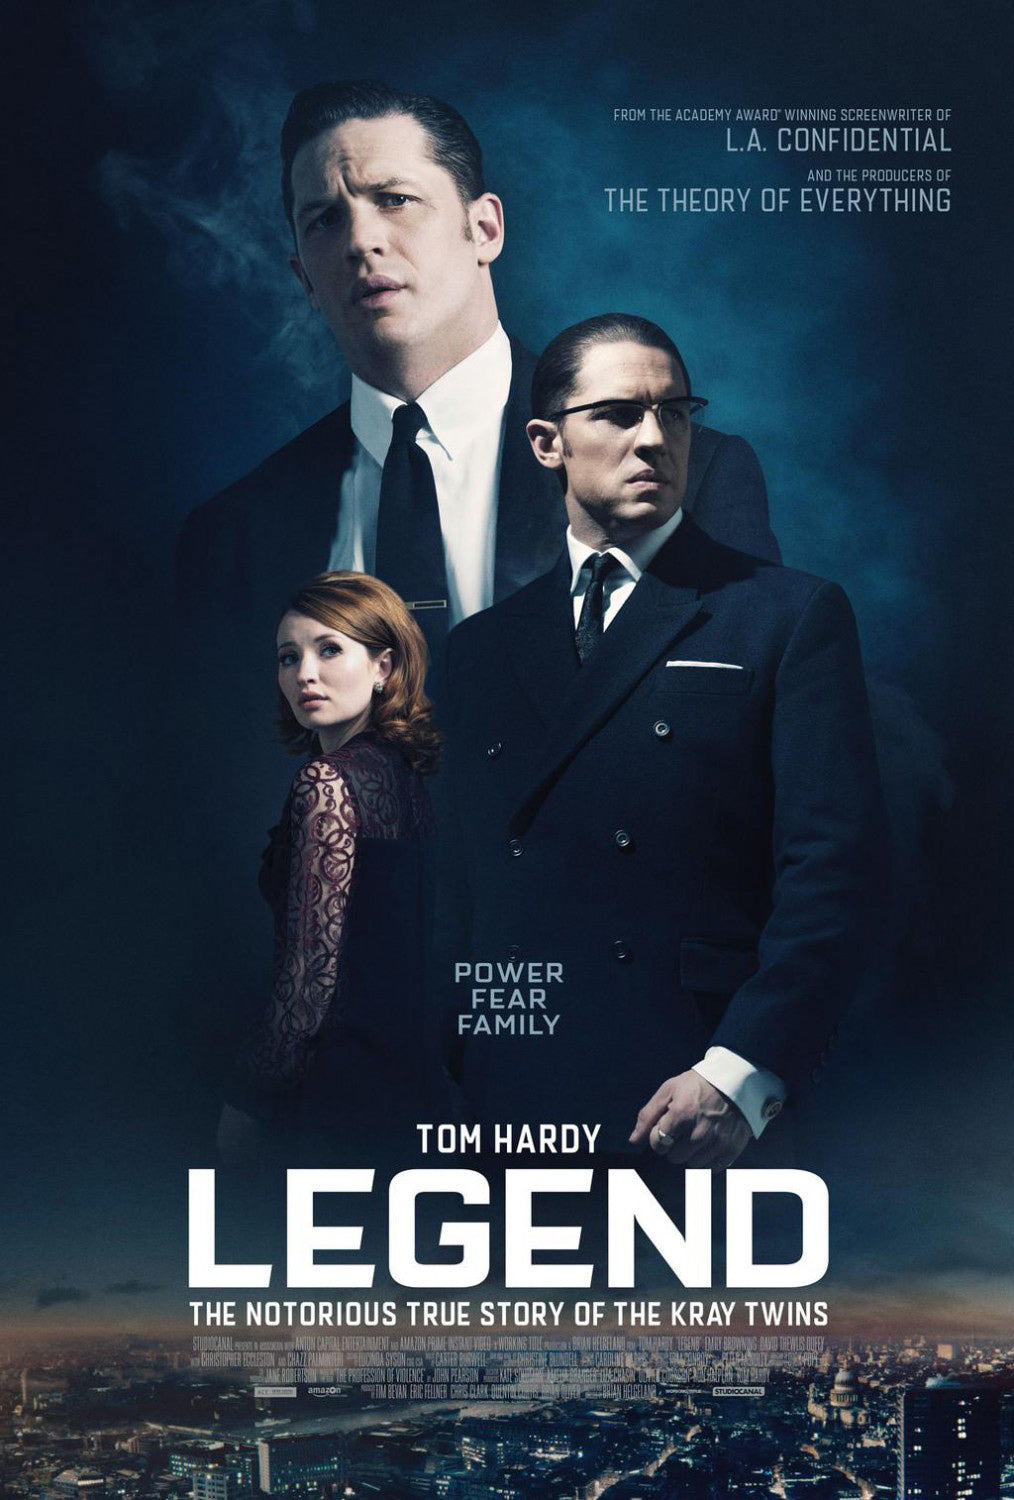 Legend movie poster with Tom Hardy as both Kray Twins and Emily Browning on the poster